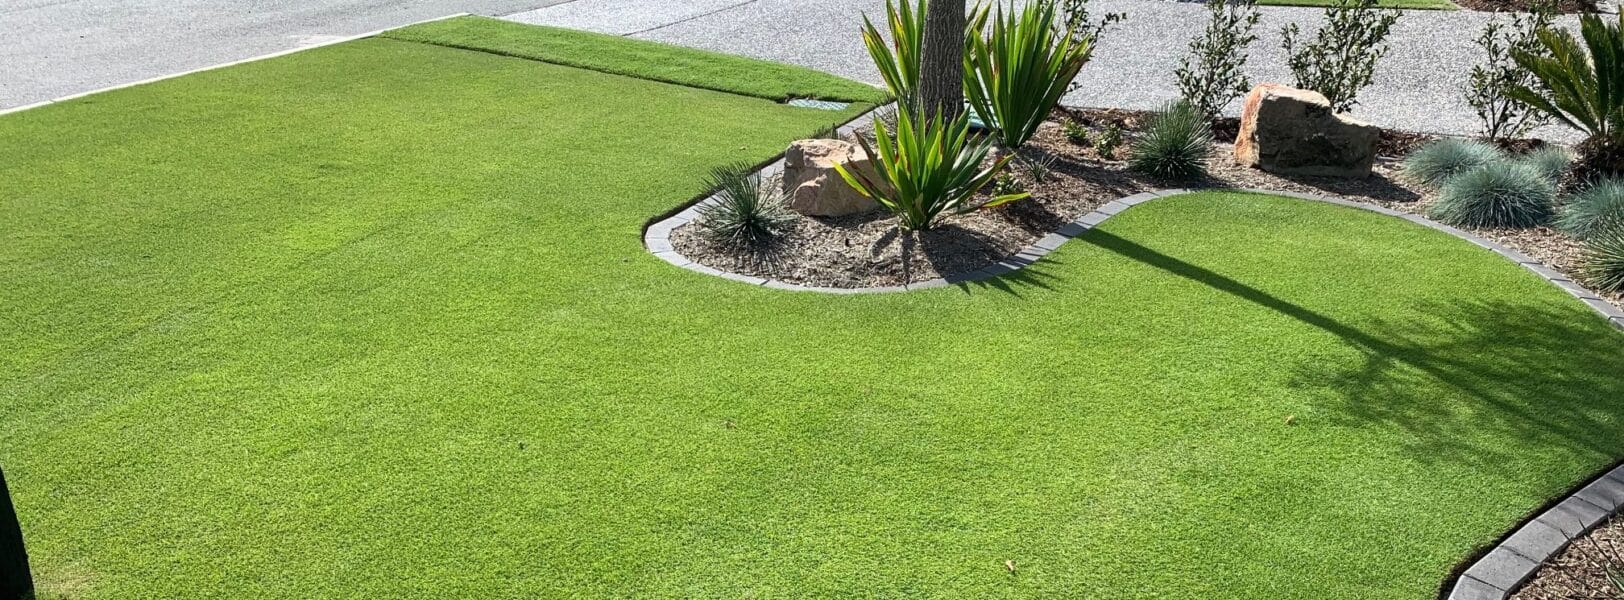 Sir Grange Zoysia: Lush and Durable Turf for Beautiful Landscapes | Parklea Sand and Soil.